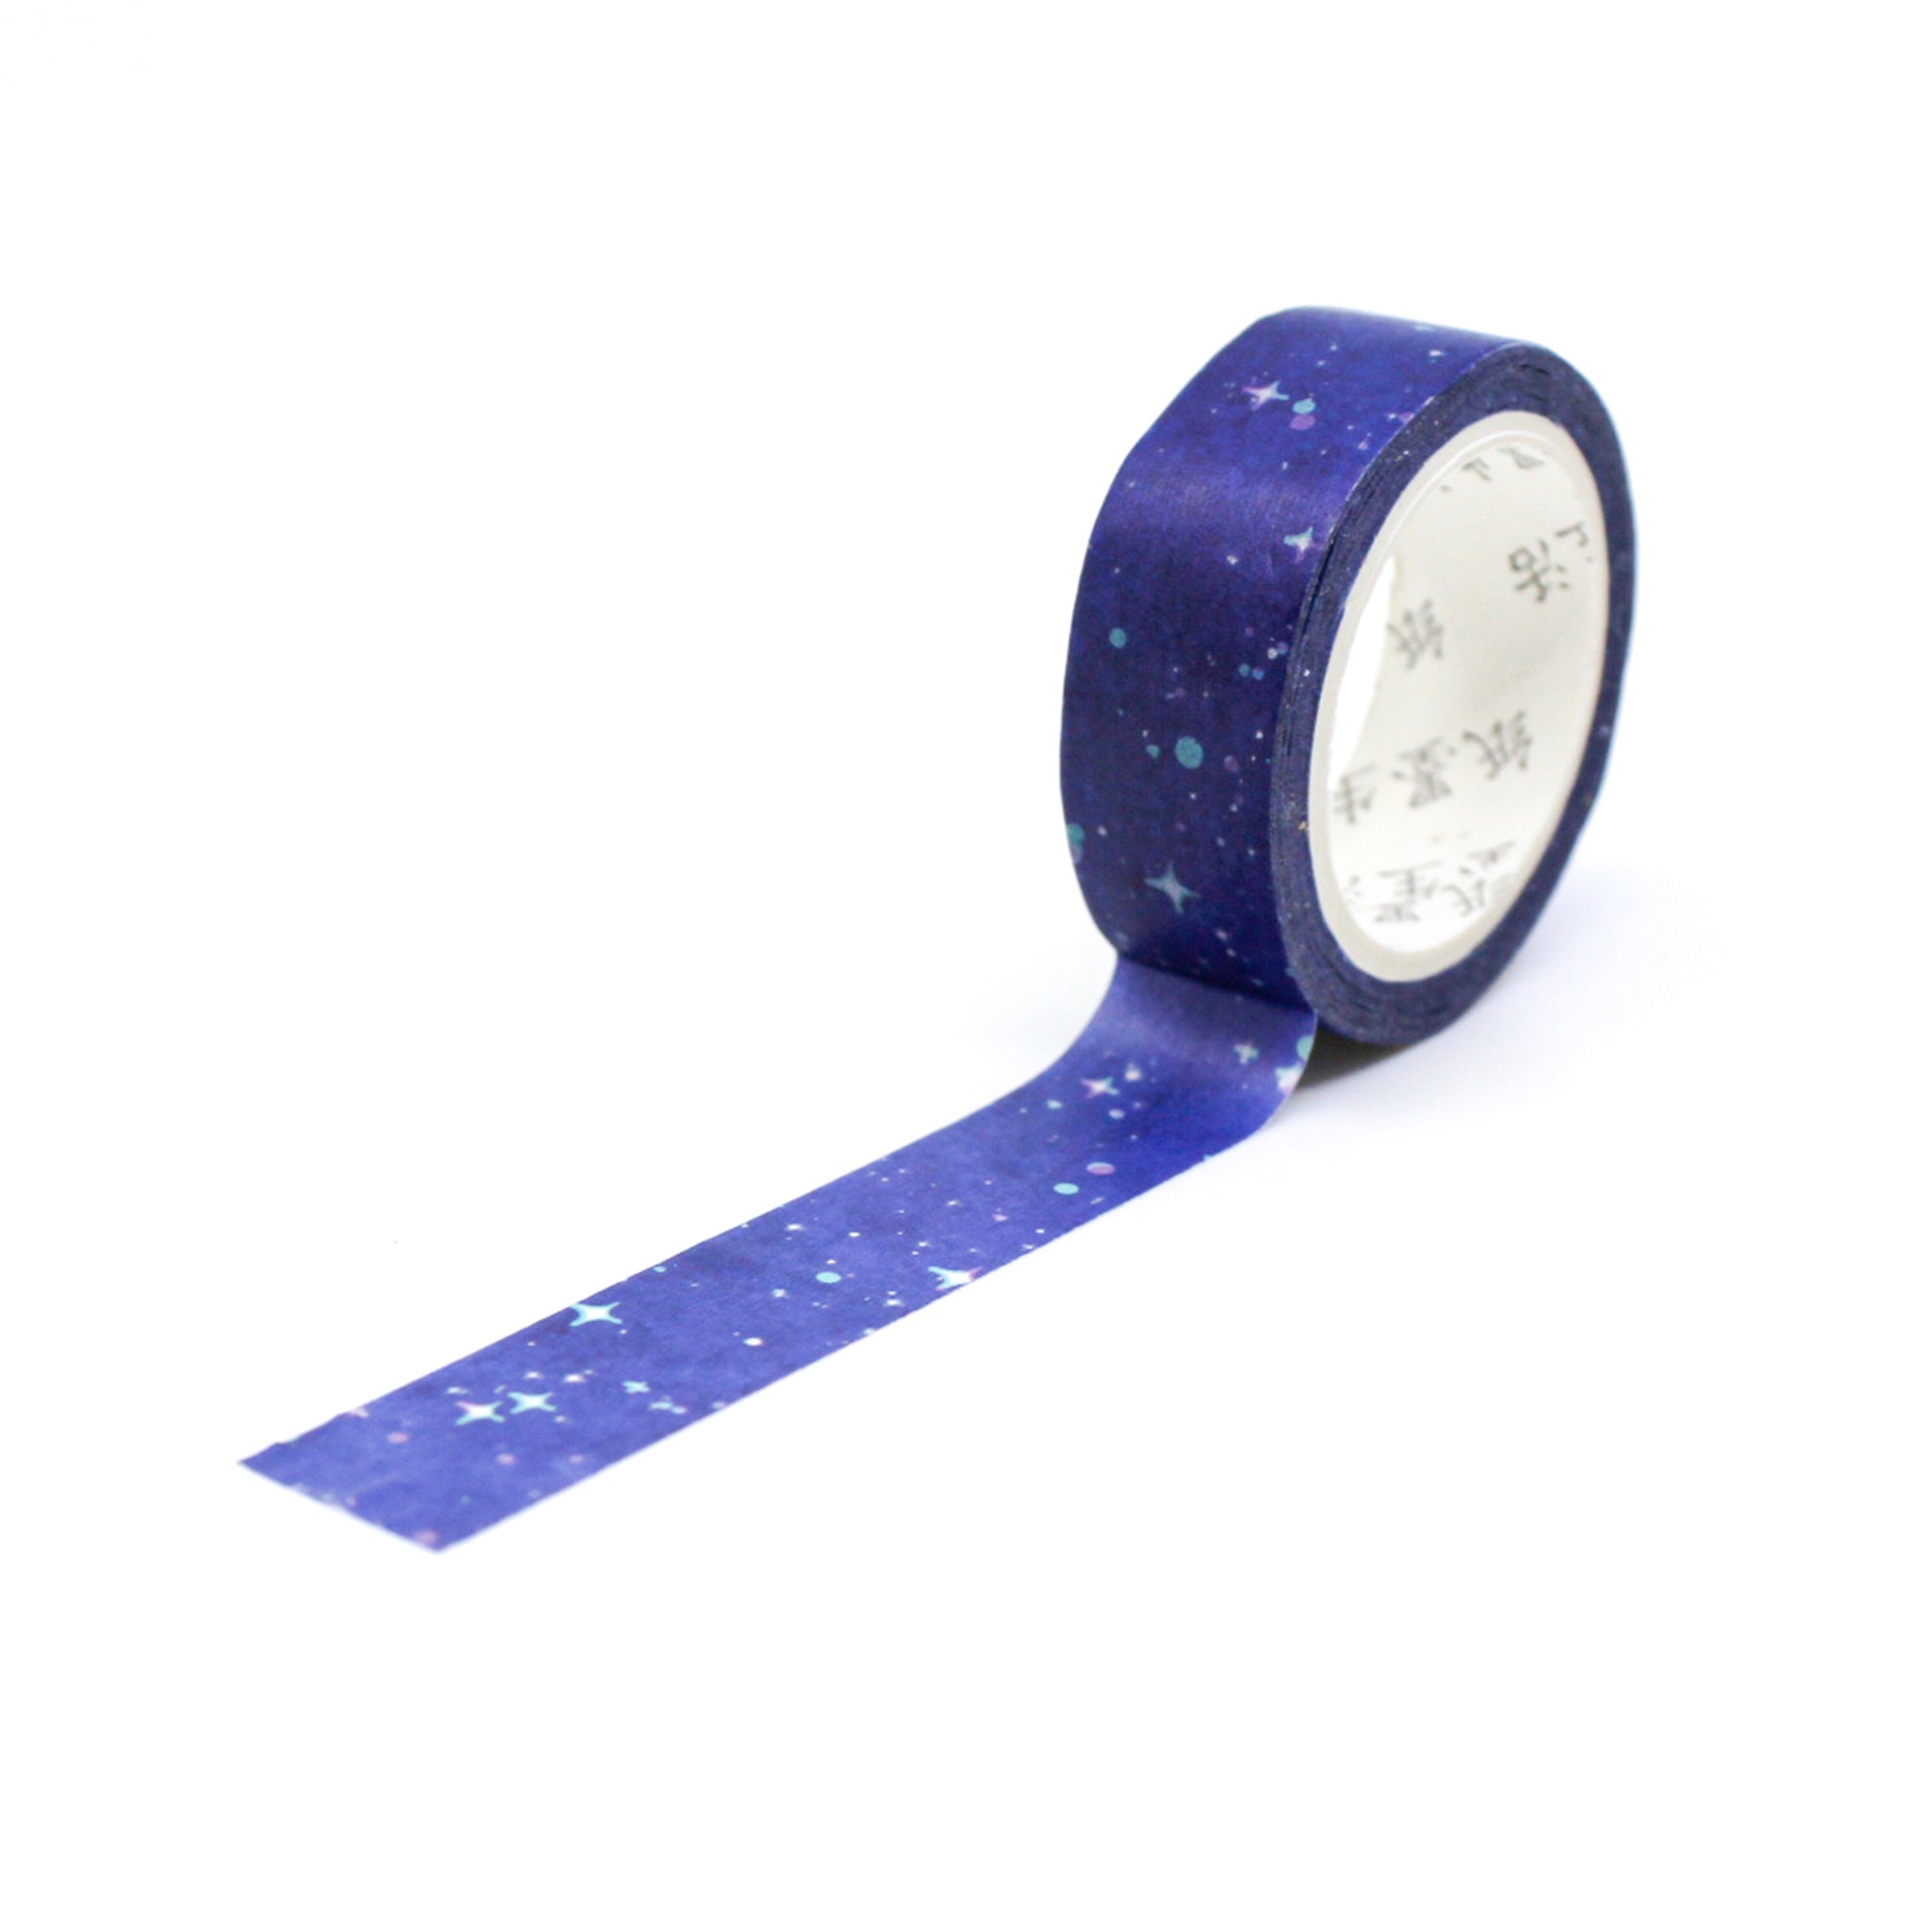 Celestial Washi Tapes, Planets, Sky, Moon, Clouds, Stars, Space, Blue,  Mystical, Dreamy, Cosmic